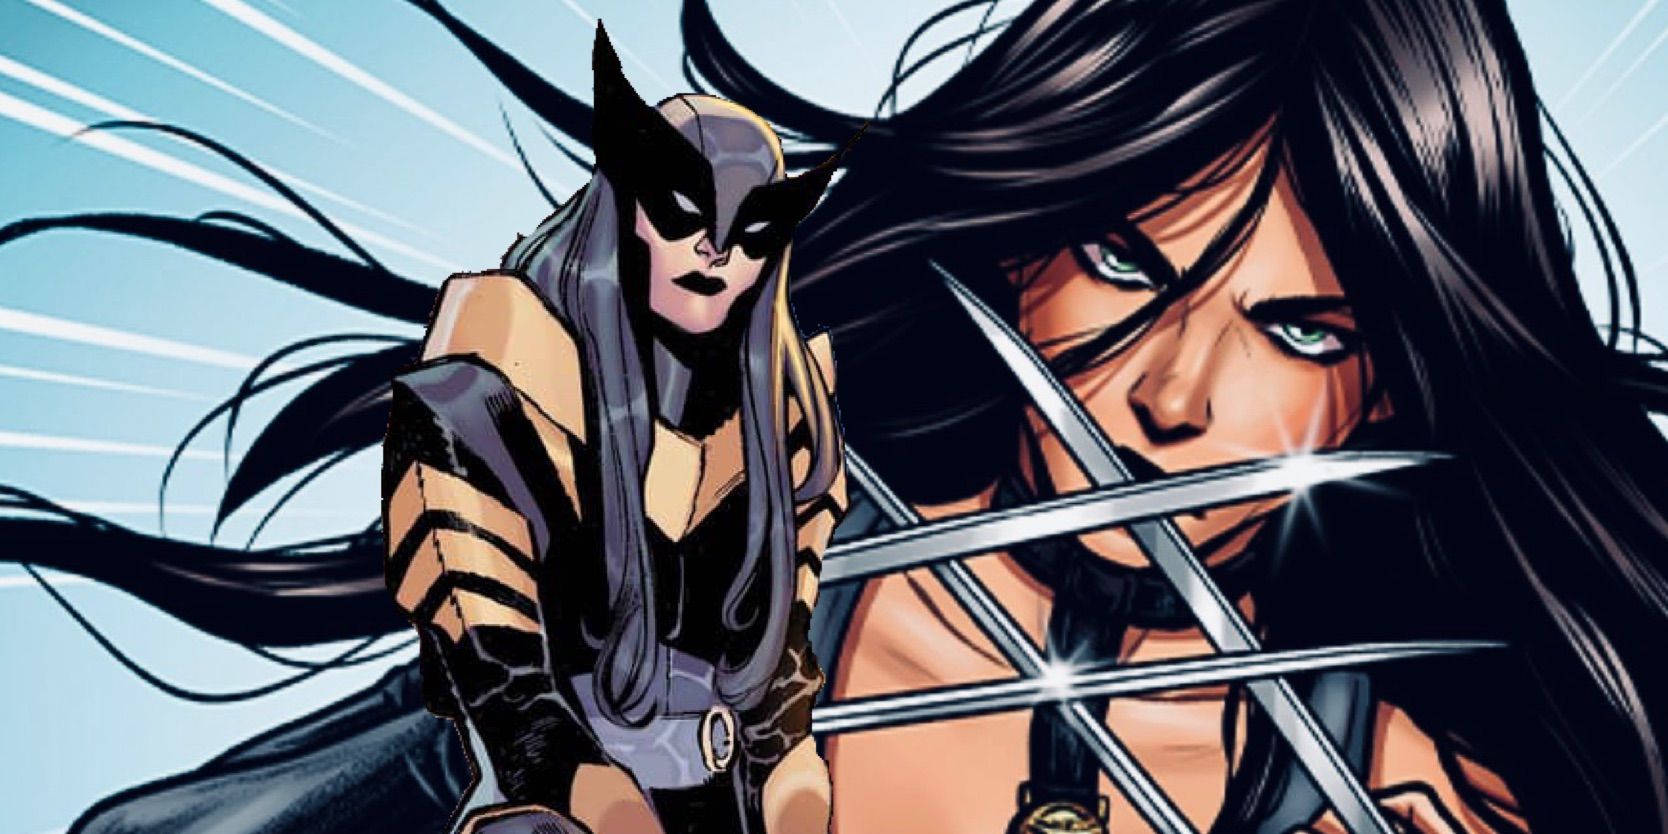 Laura Kinney (Wolverine/X-23) in her new NYX costume (foreground) and popping her claws in the background